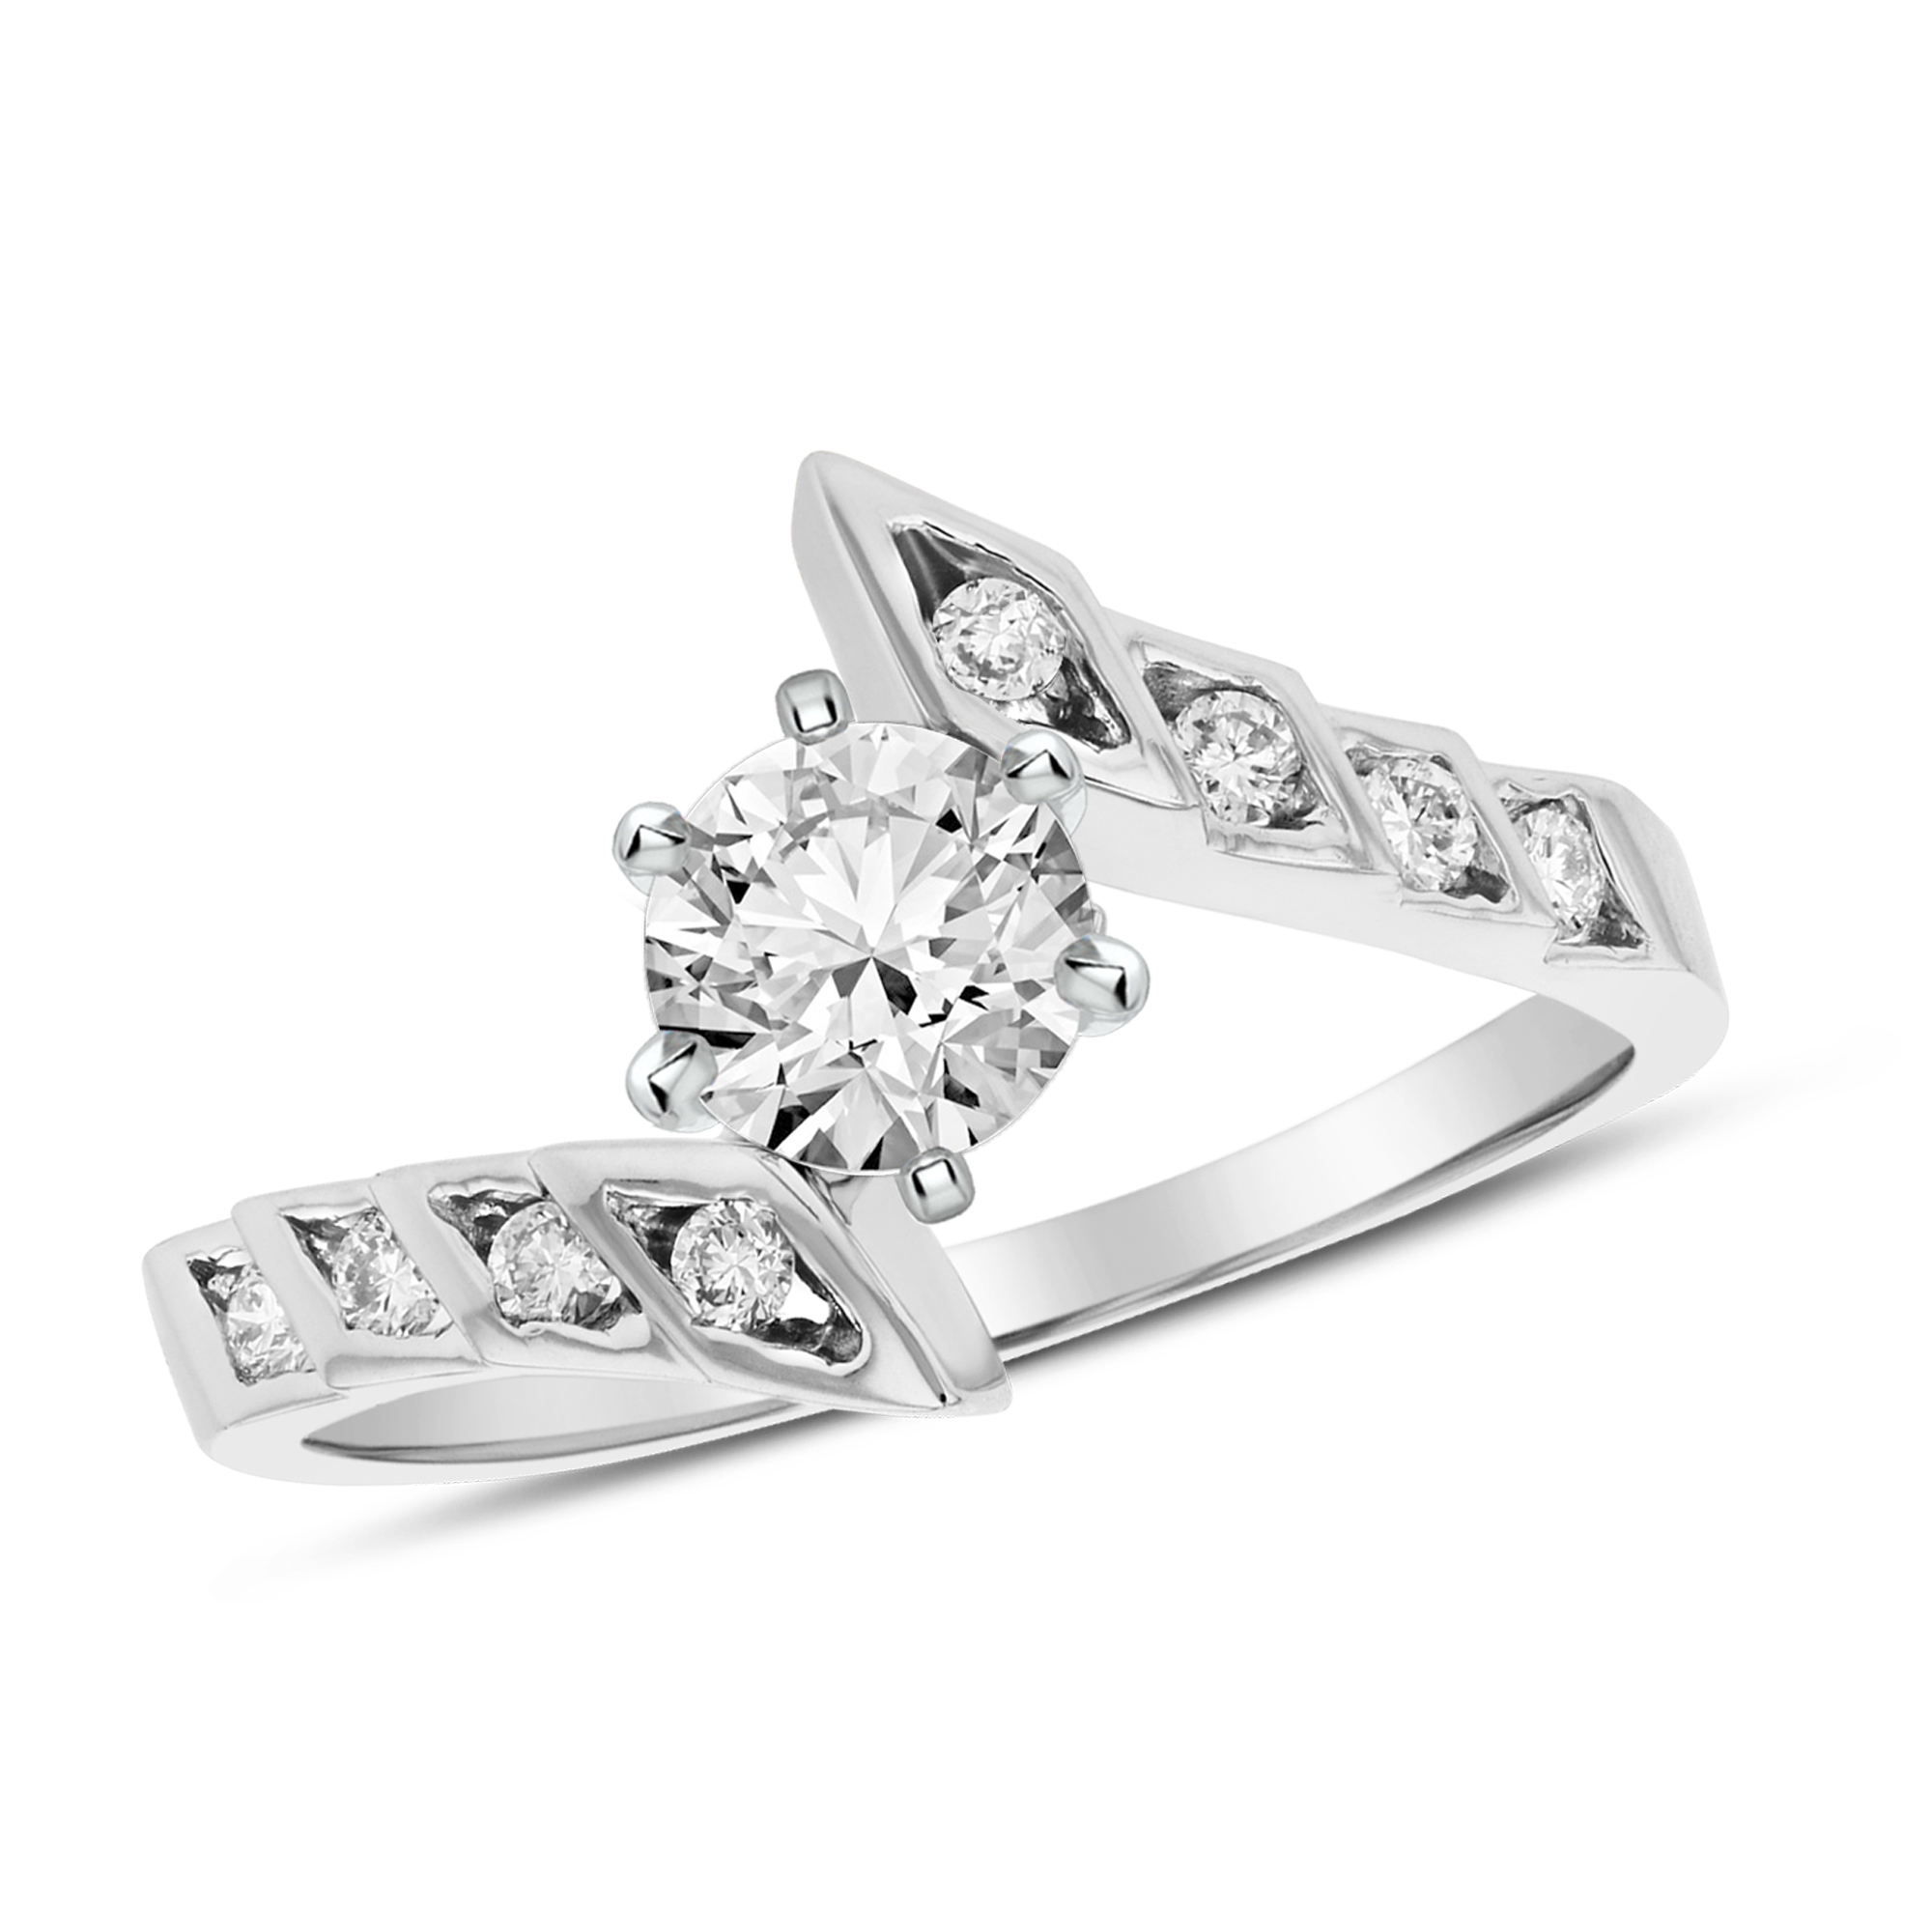 View 0.55ctw Diamond Engagement Ring in 14k Gold